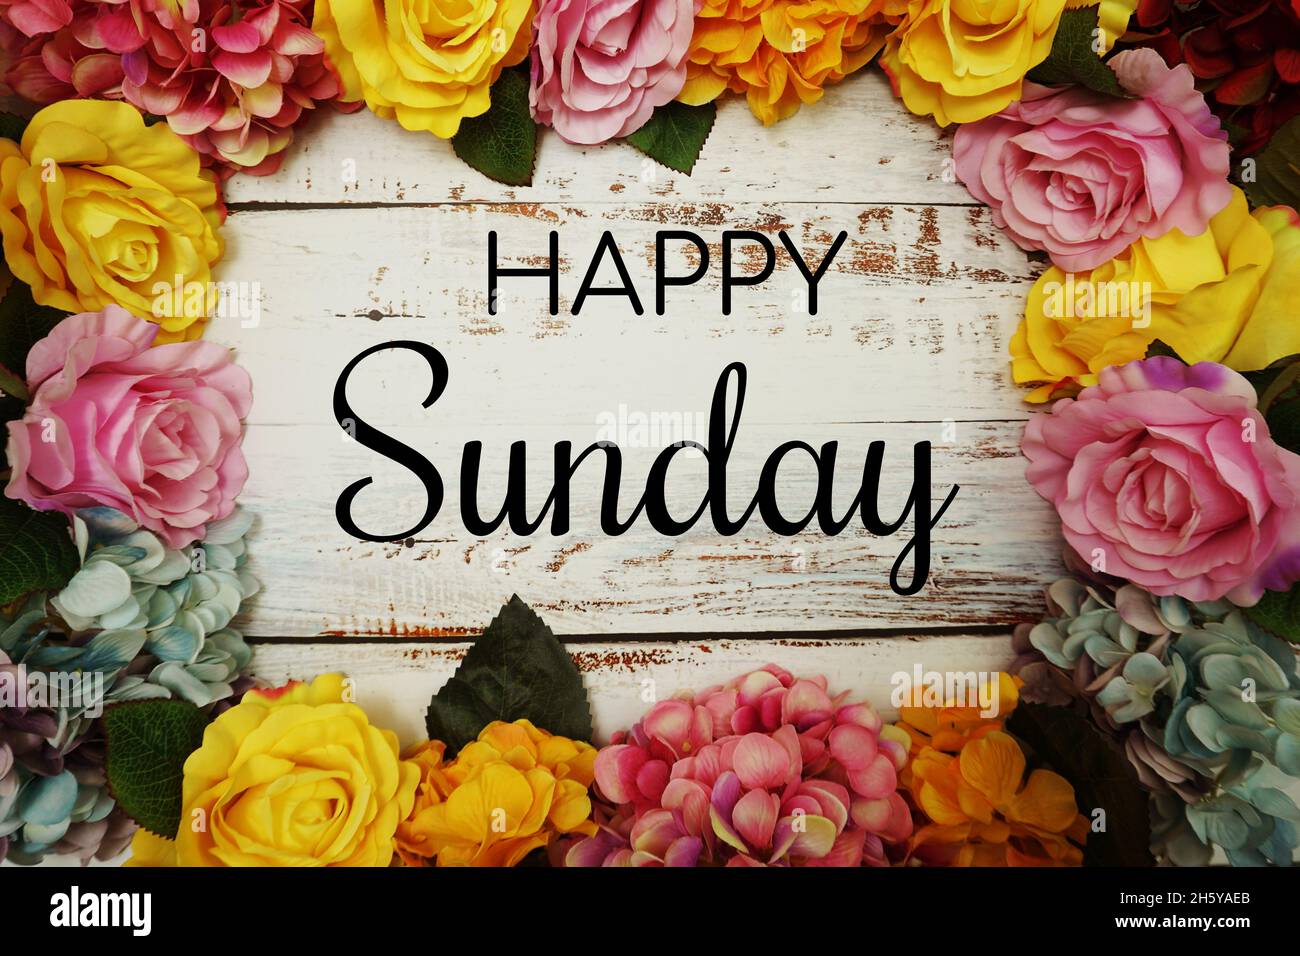 Happy Sunday text and Flowers Colorful Border Frame on wooden ...